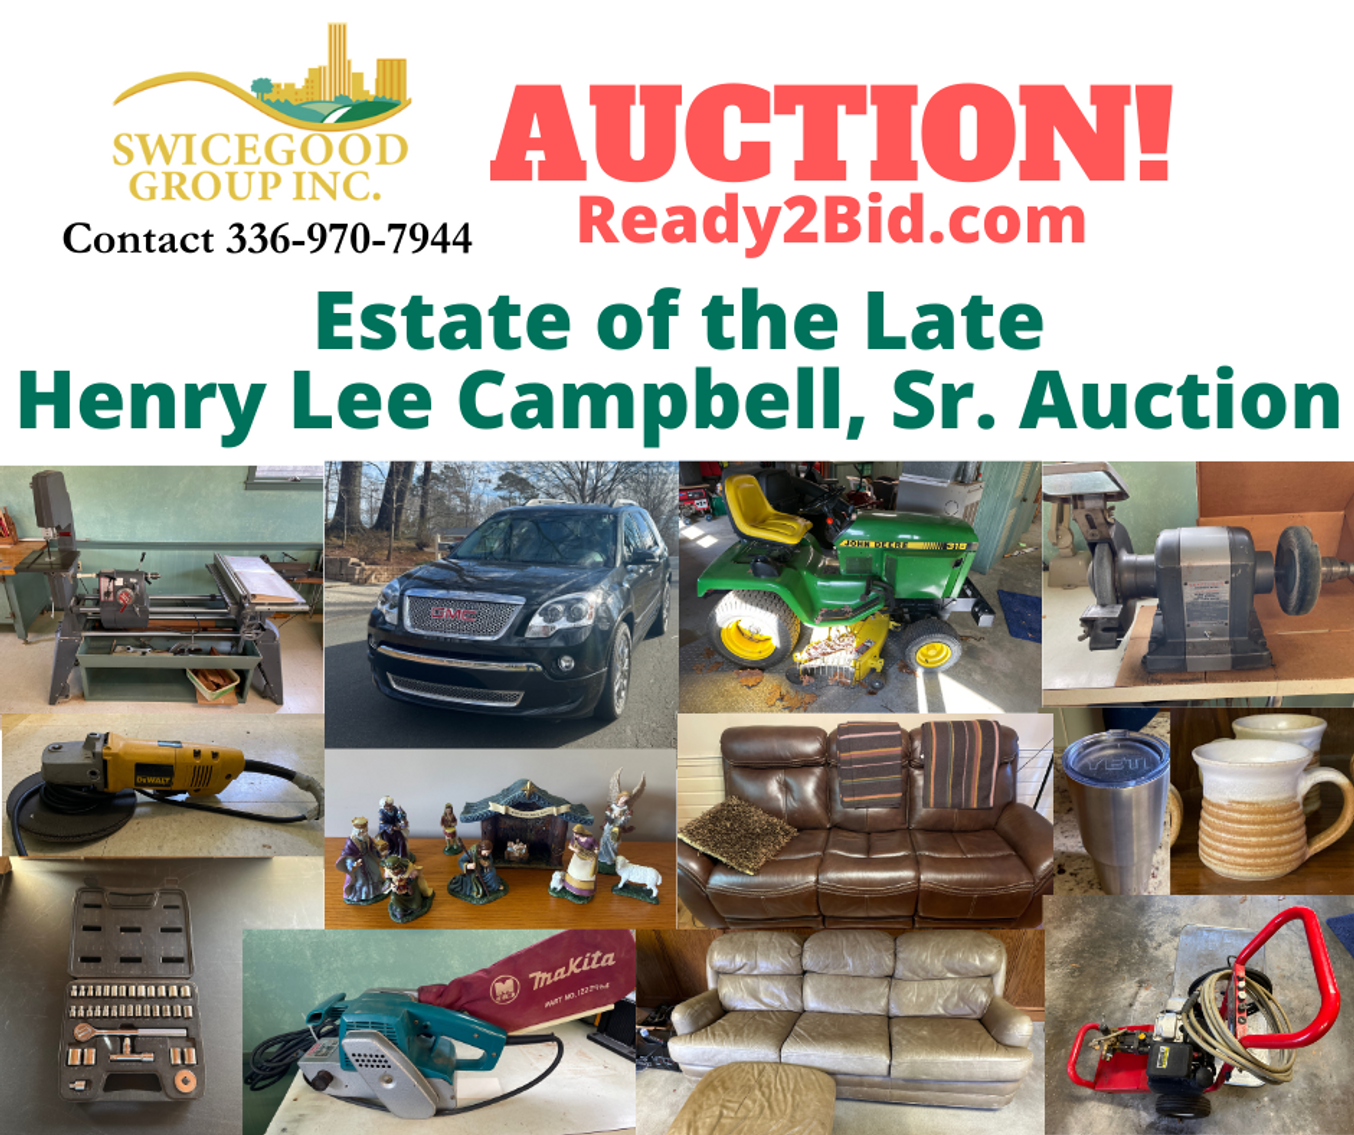 Estate of the Late Henry Lee Campbell, Sr. Auction